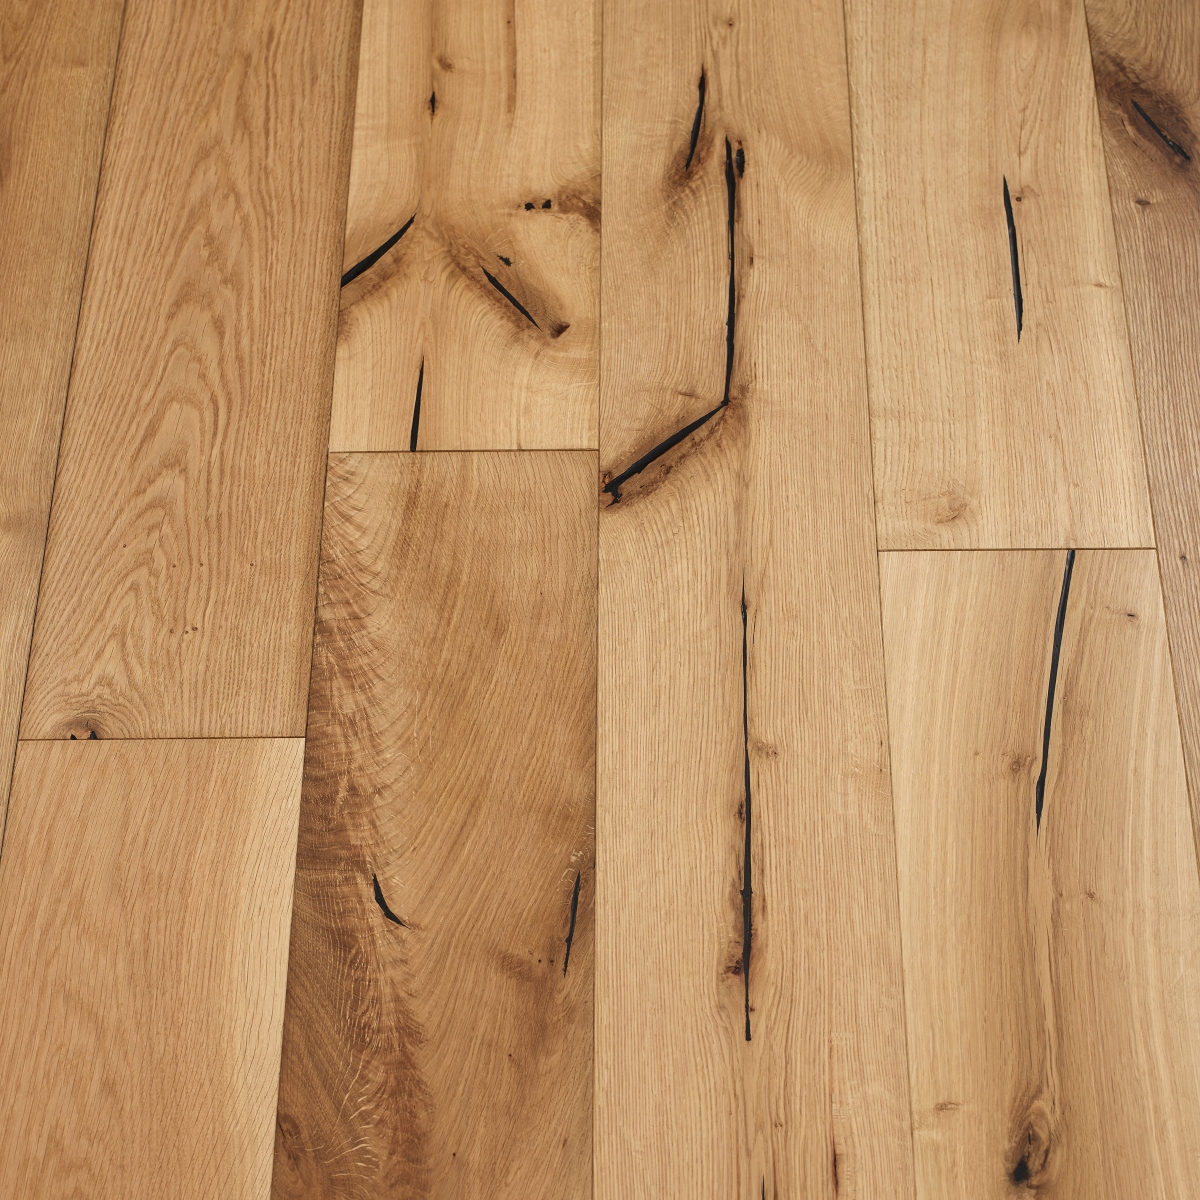 Distressed Natural Woodflooring - image showcasing distressed natural-colored wood flooring with a raw and untreated look, emphasizing the beauty of natural wood grains and textures.